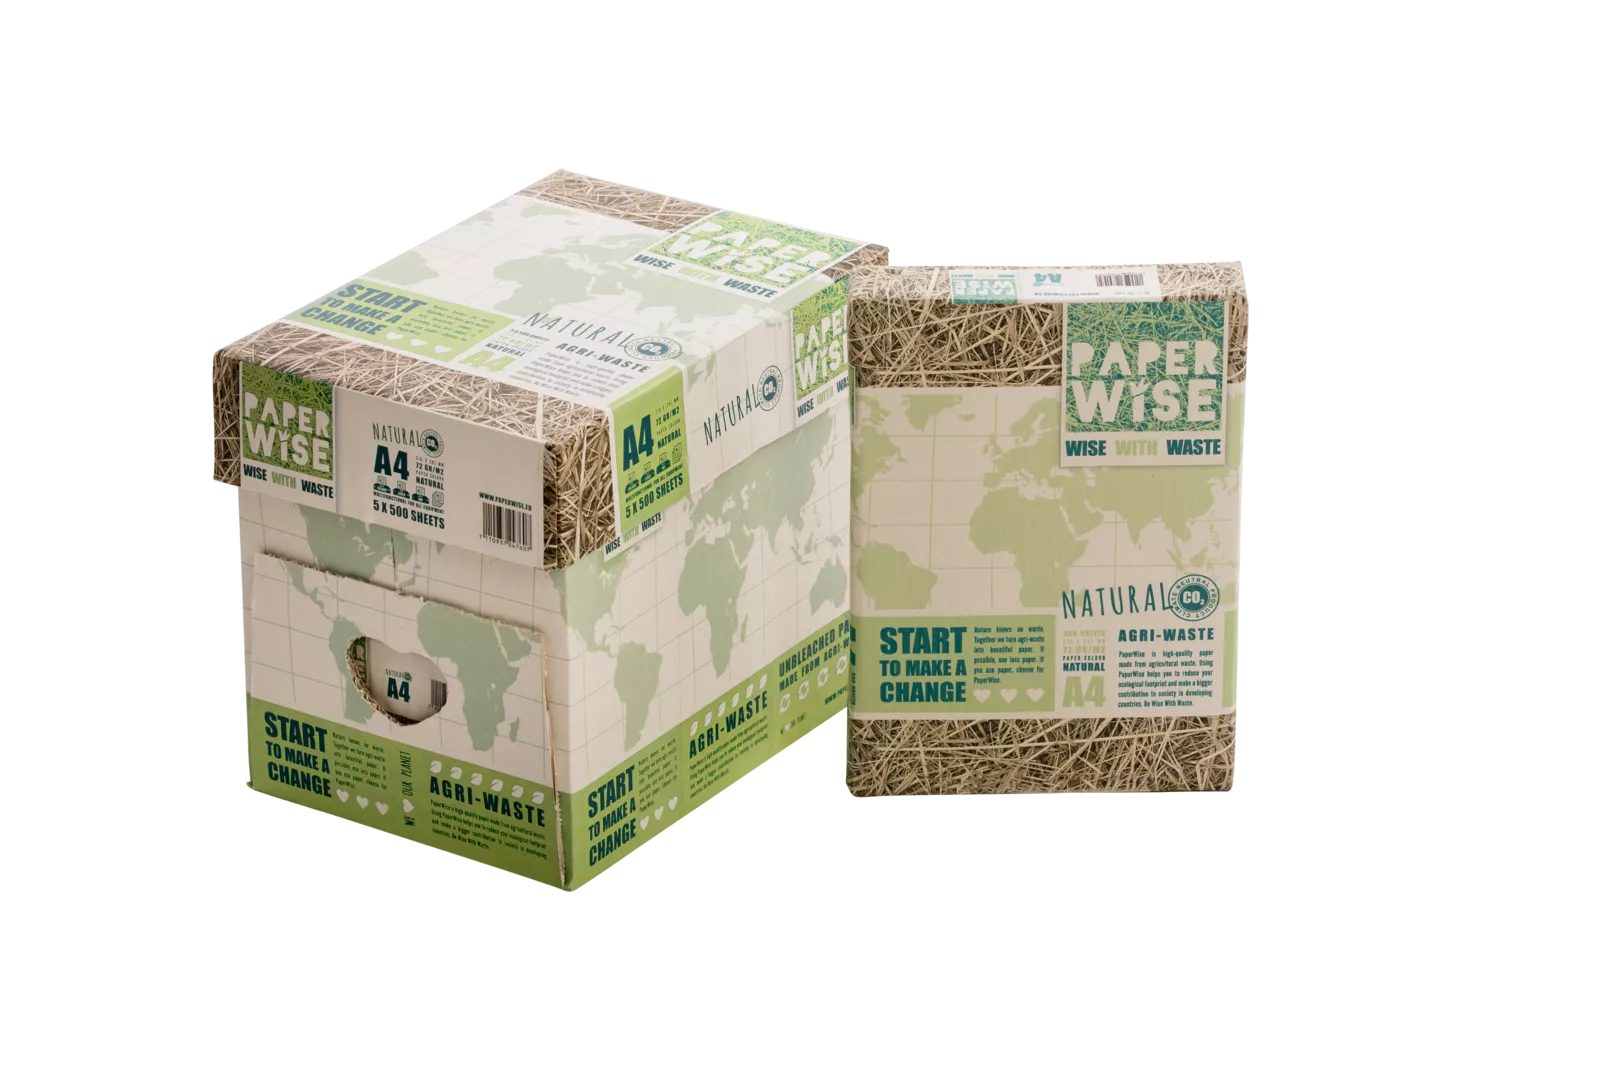 PaperWise Natural CSR copy printing paper A4 7 gram wisewithwaste sustainable eco friendly paper office c